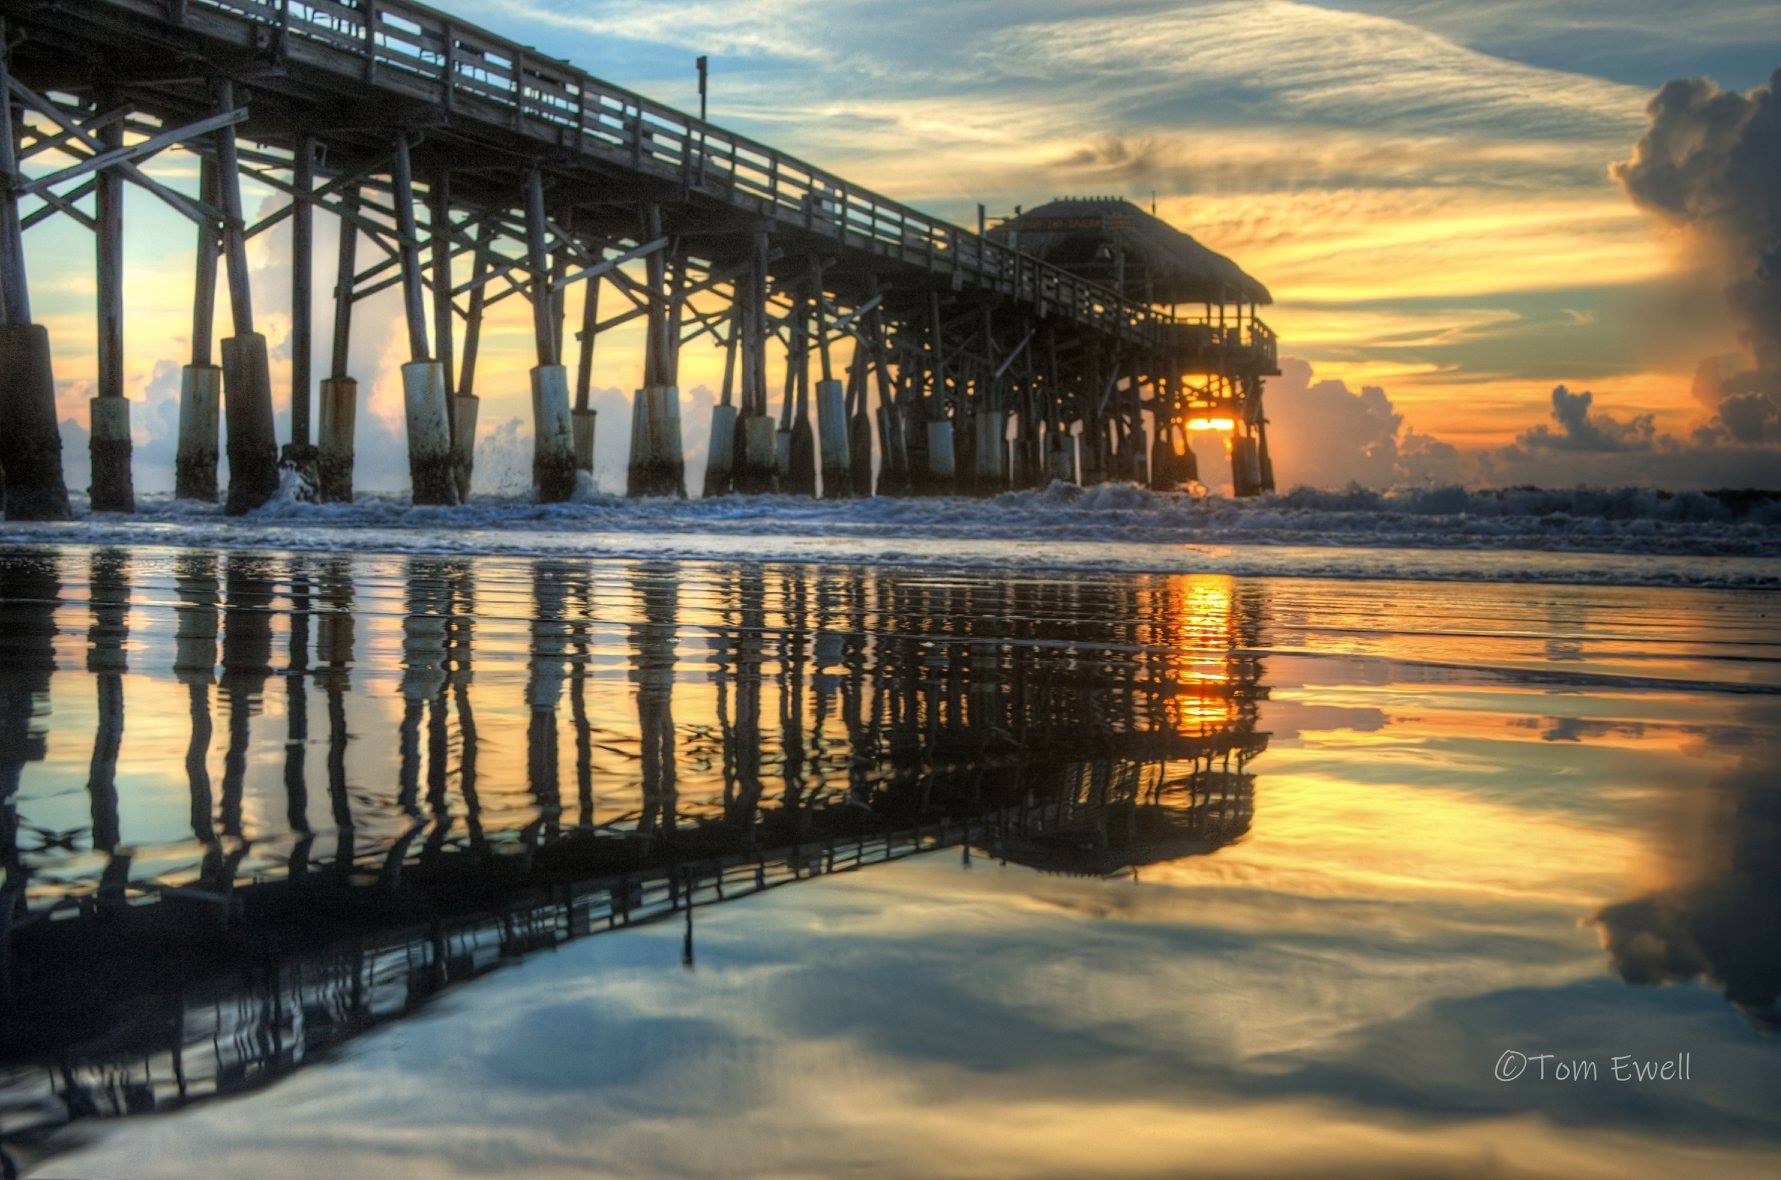 Cocoa Beach Pier - used with permission of photographer Tom Ewell&conn=none